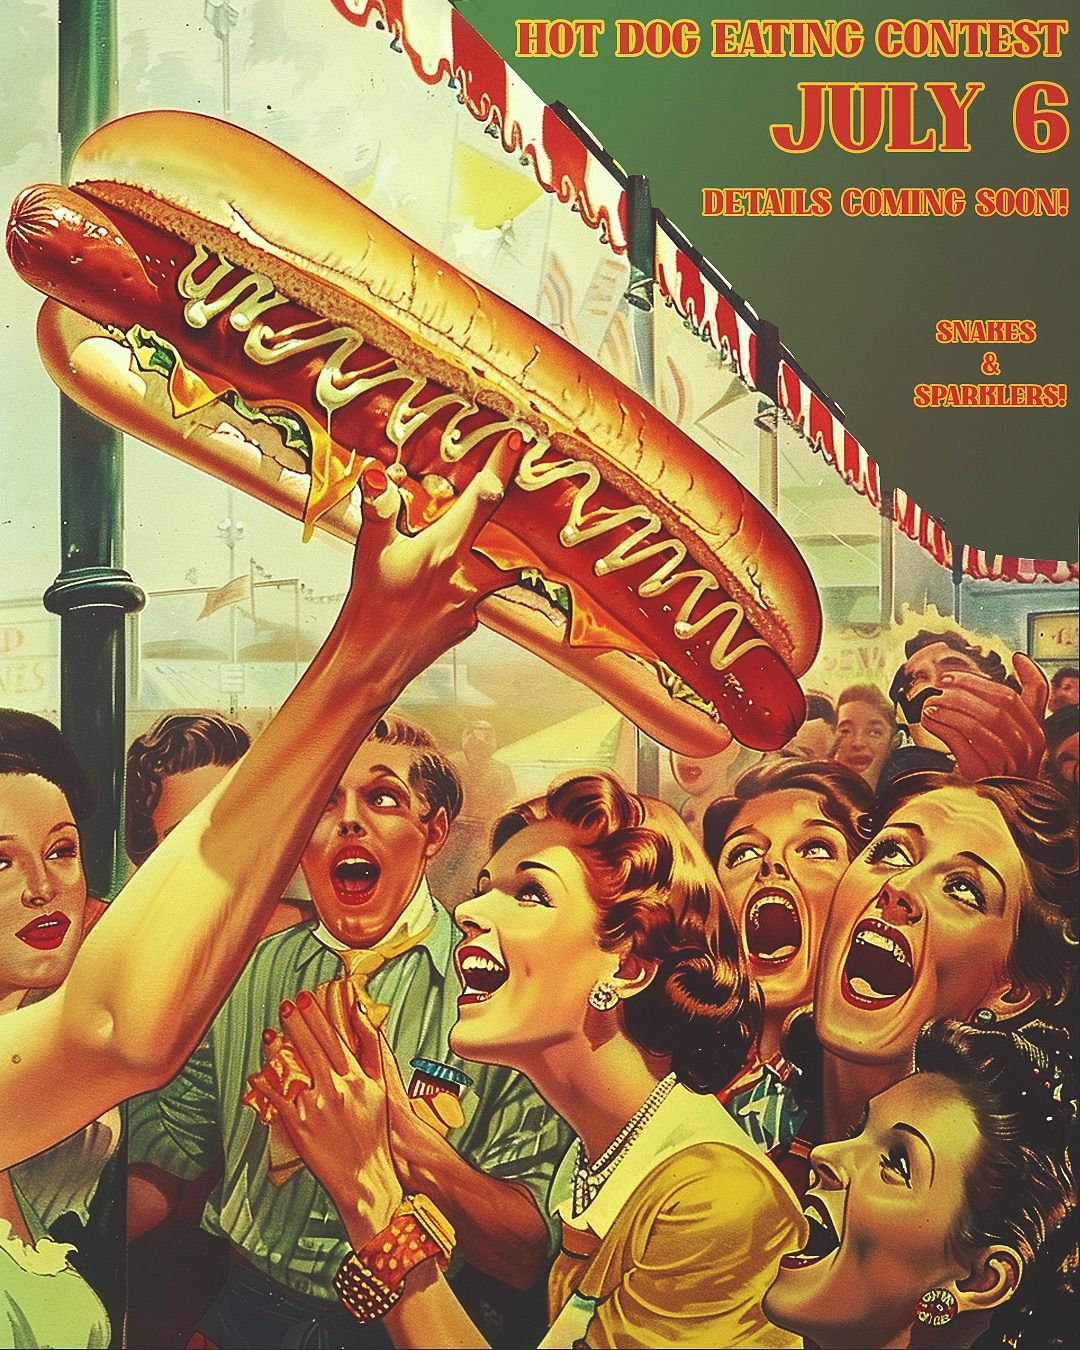 \ud83c\udf2d Hot Dog Eating Contest @ The Ritz!